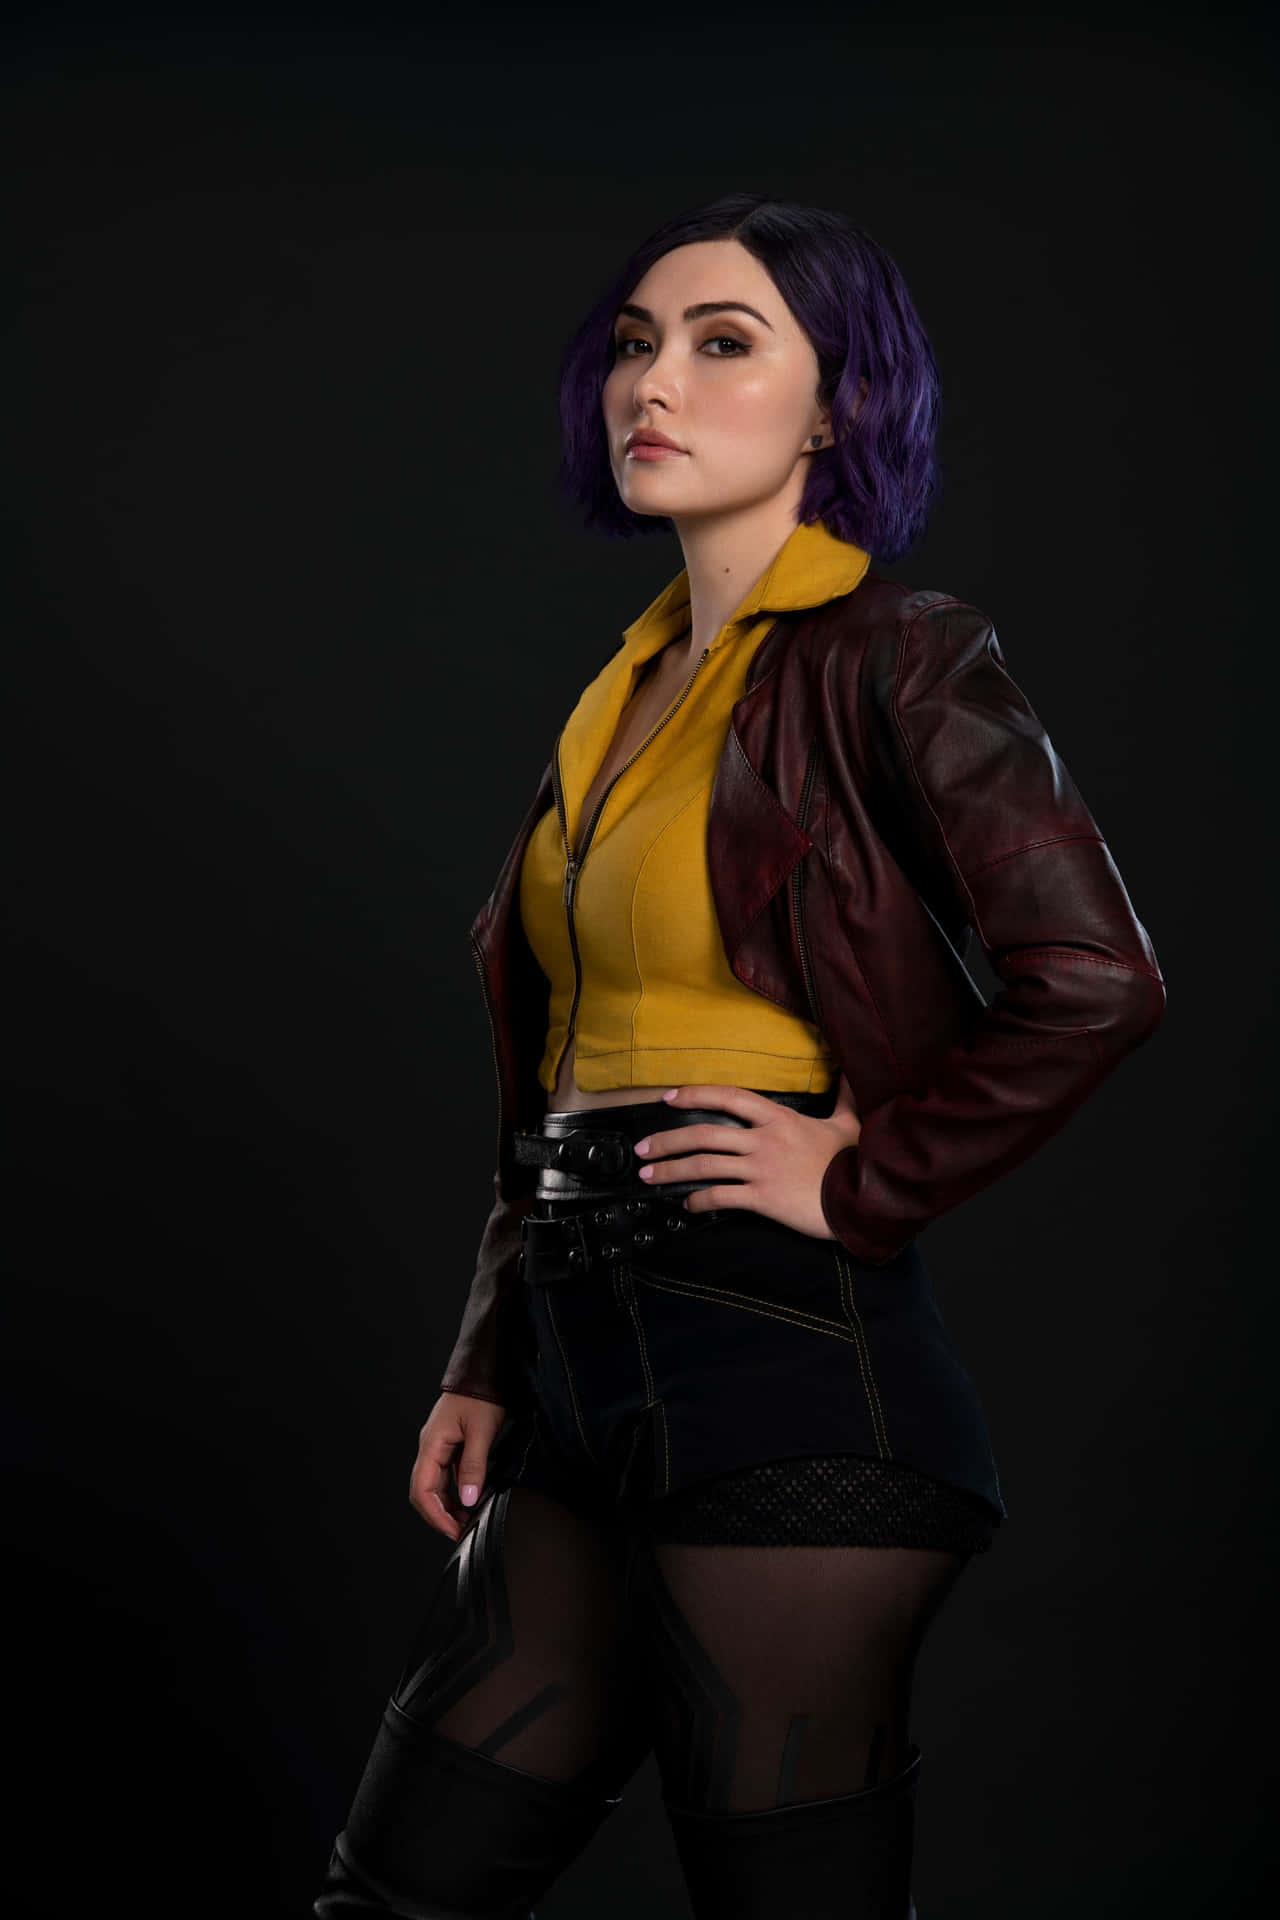 Faye Valentine striking a pose in front of a futuristic backdrop. Wallpaper